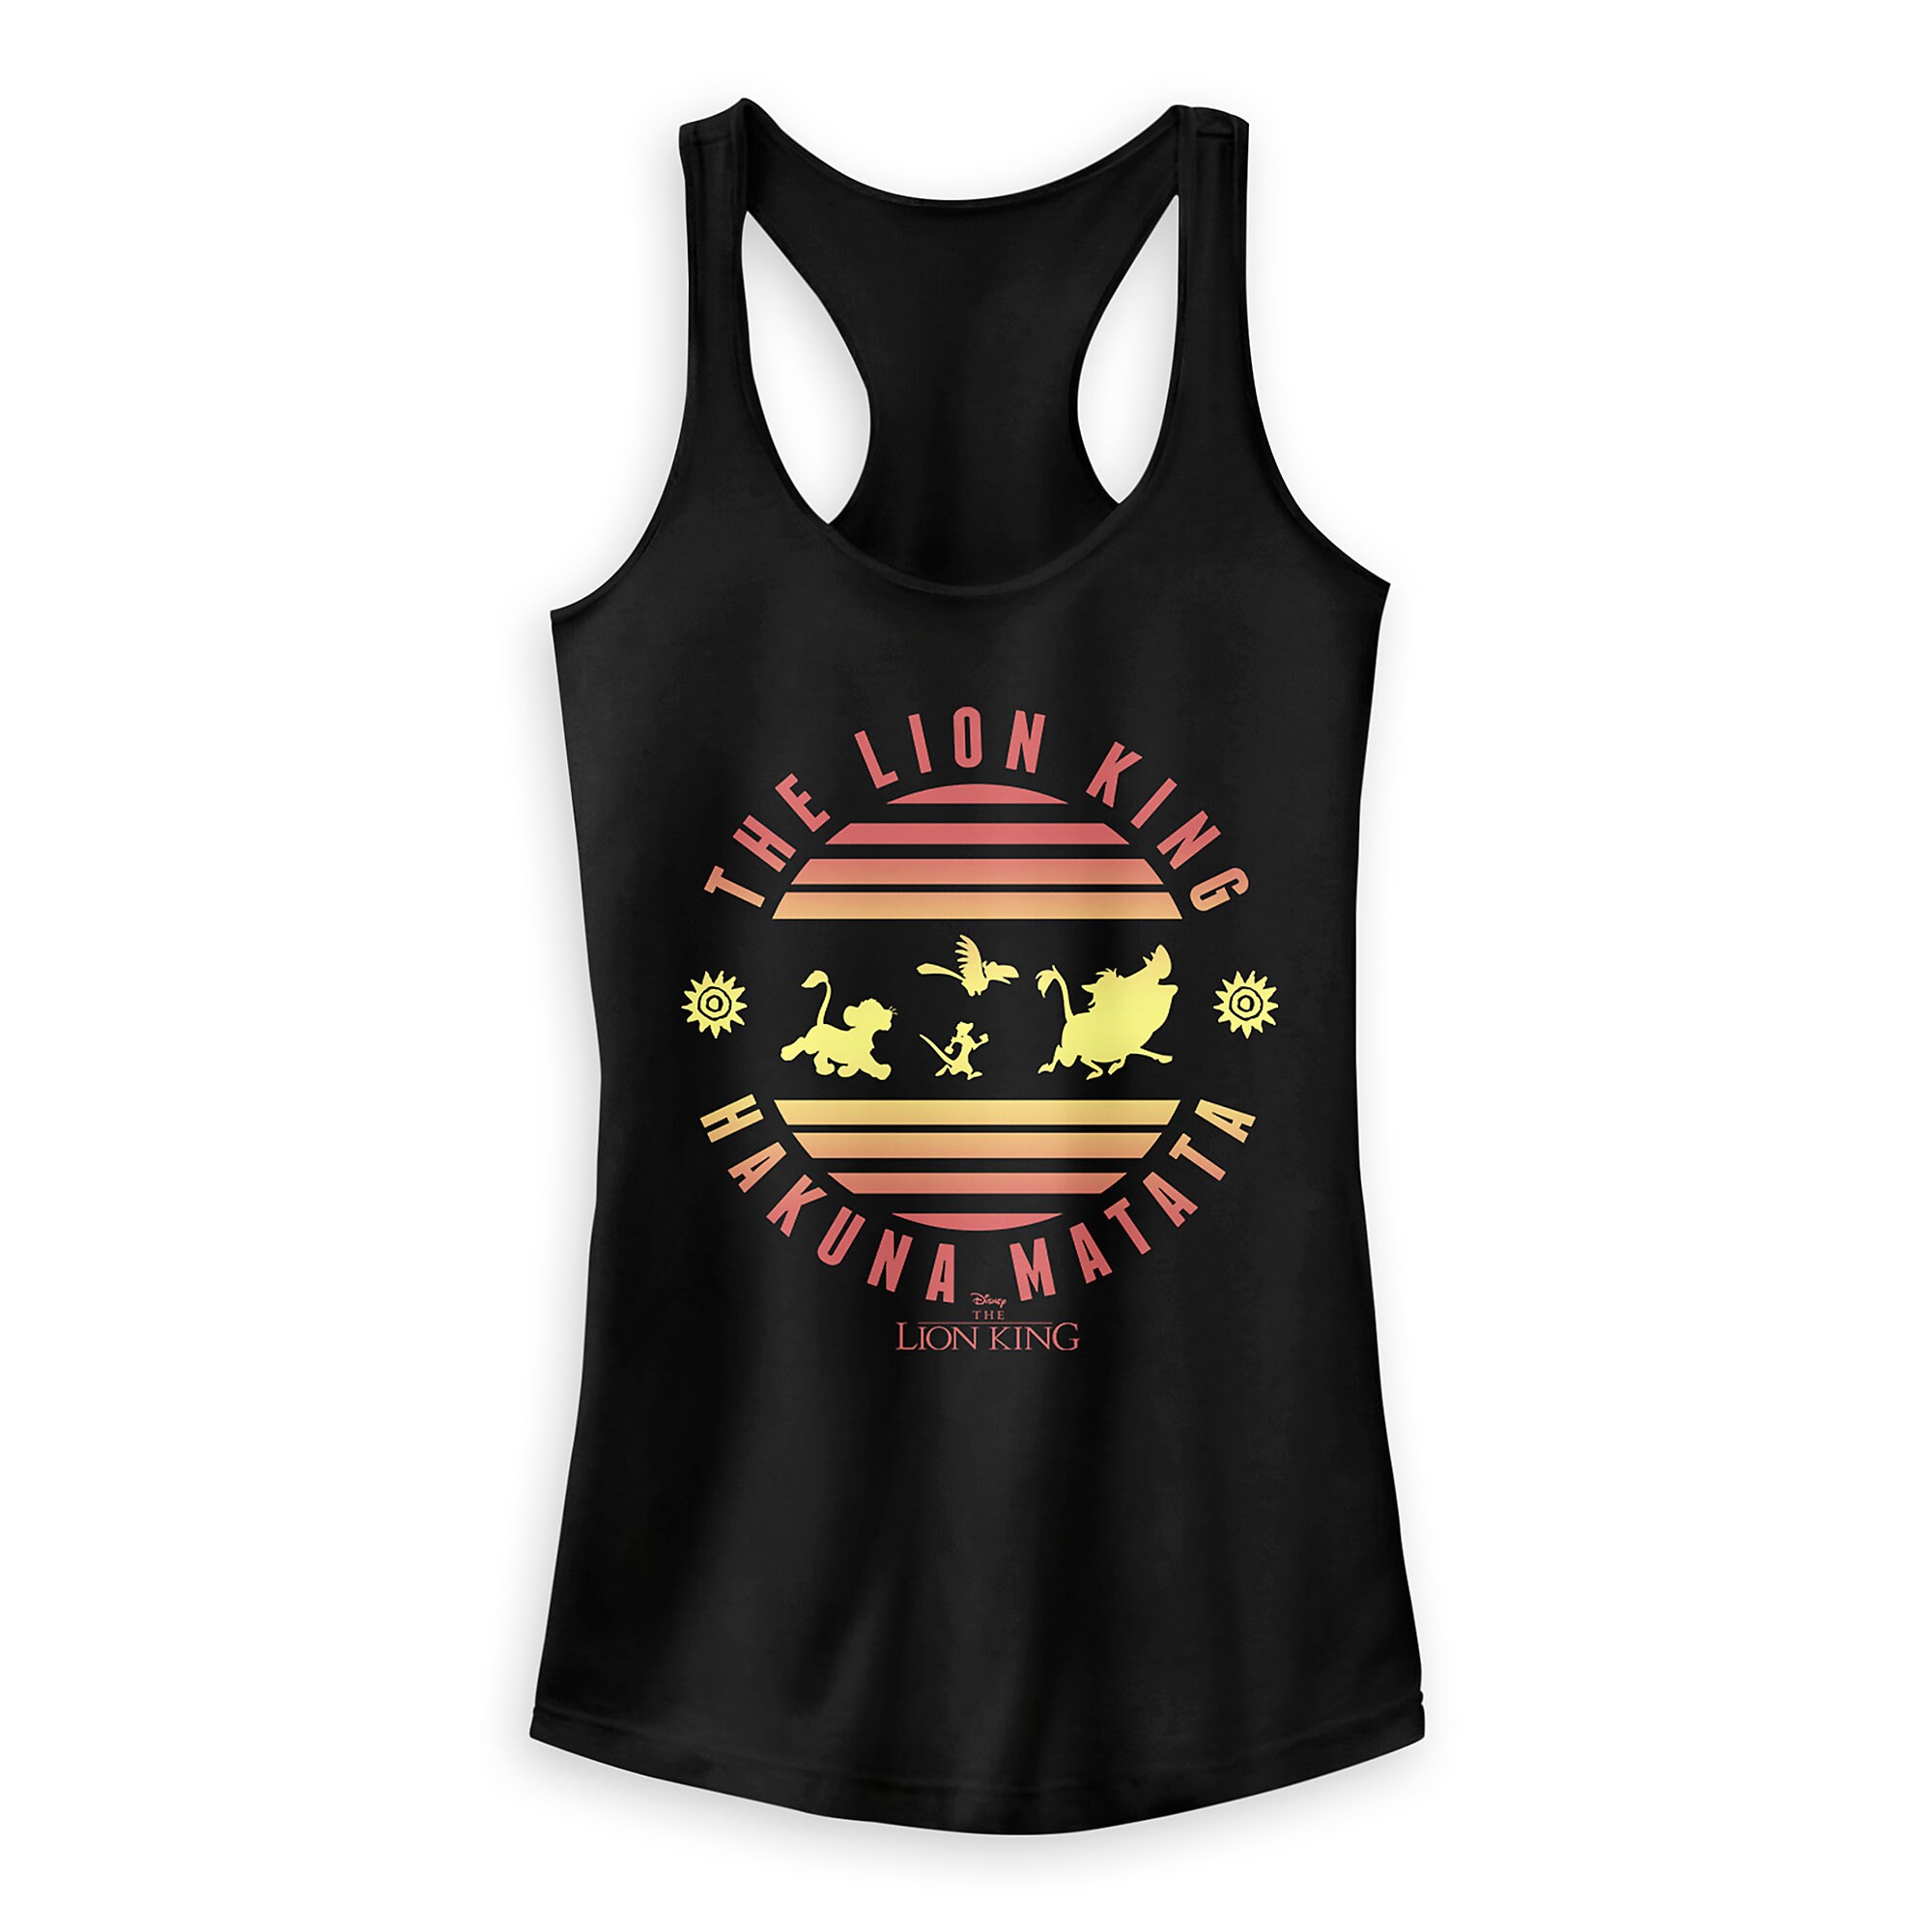 The Lion King Tank Top for Women